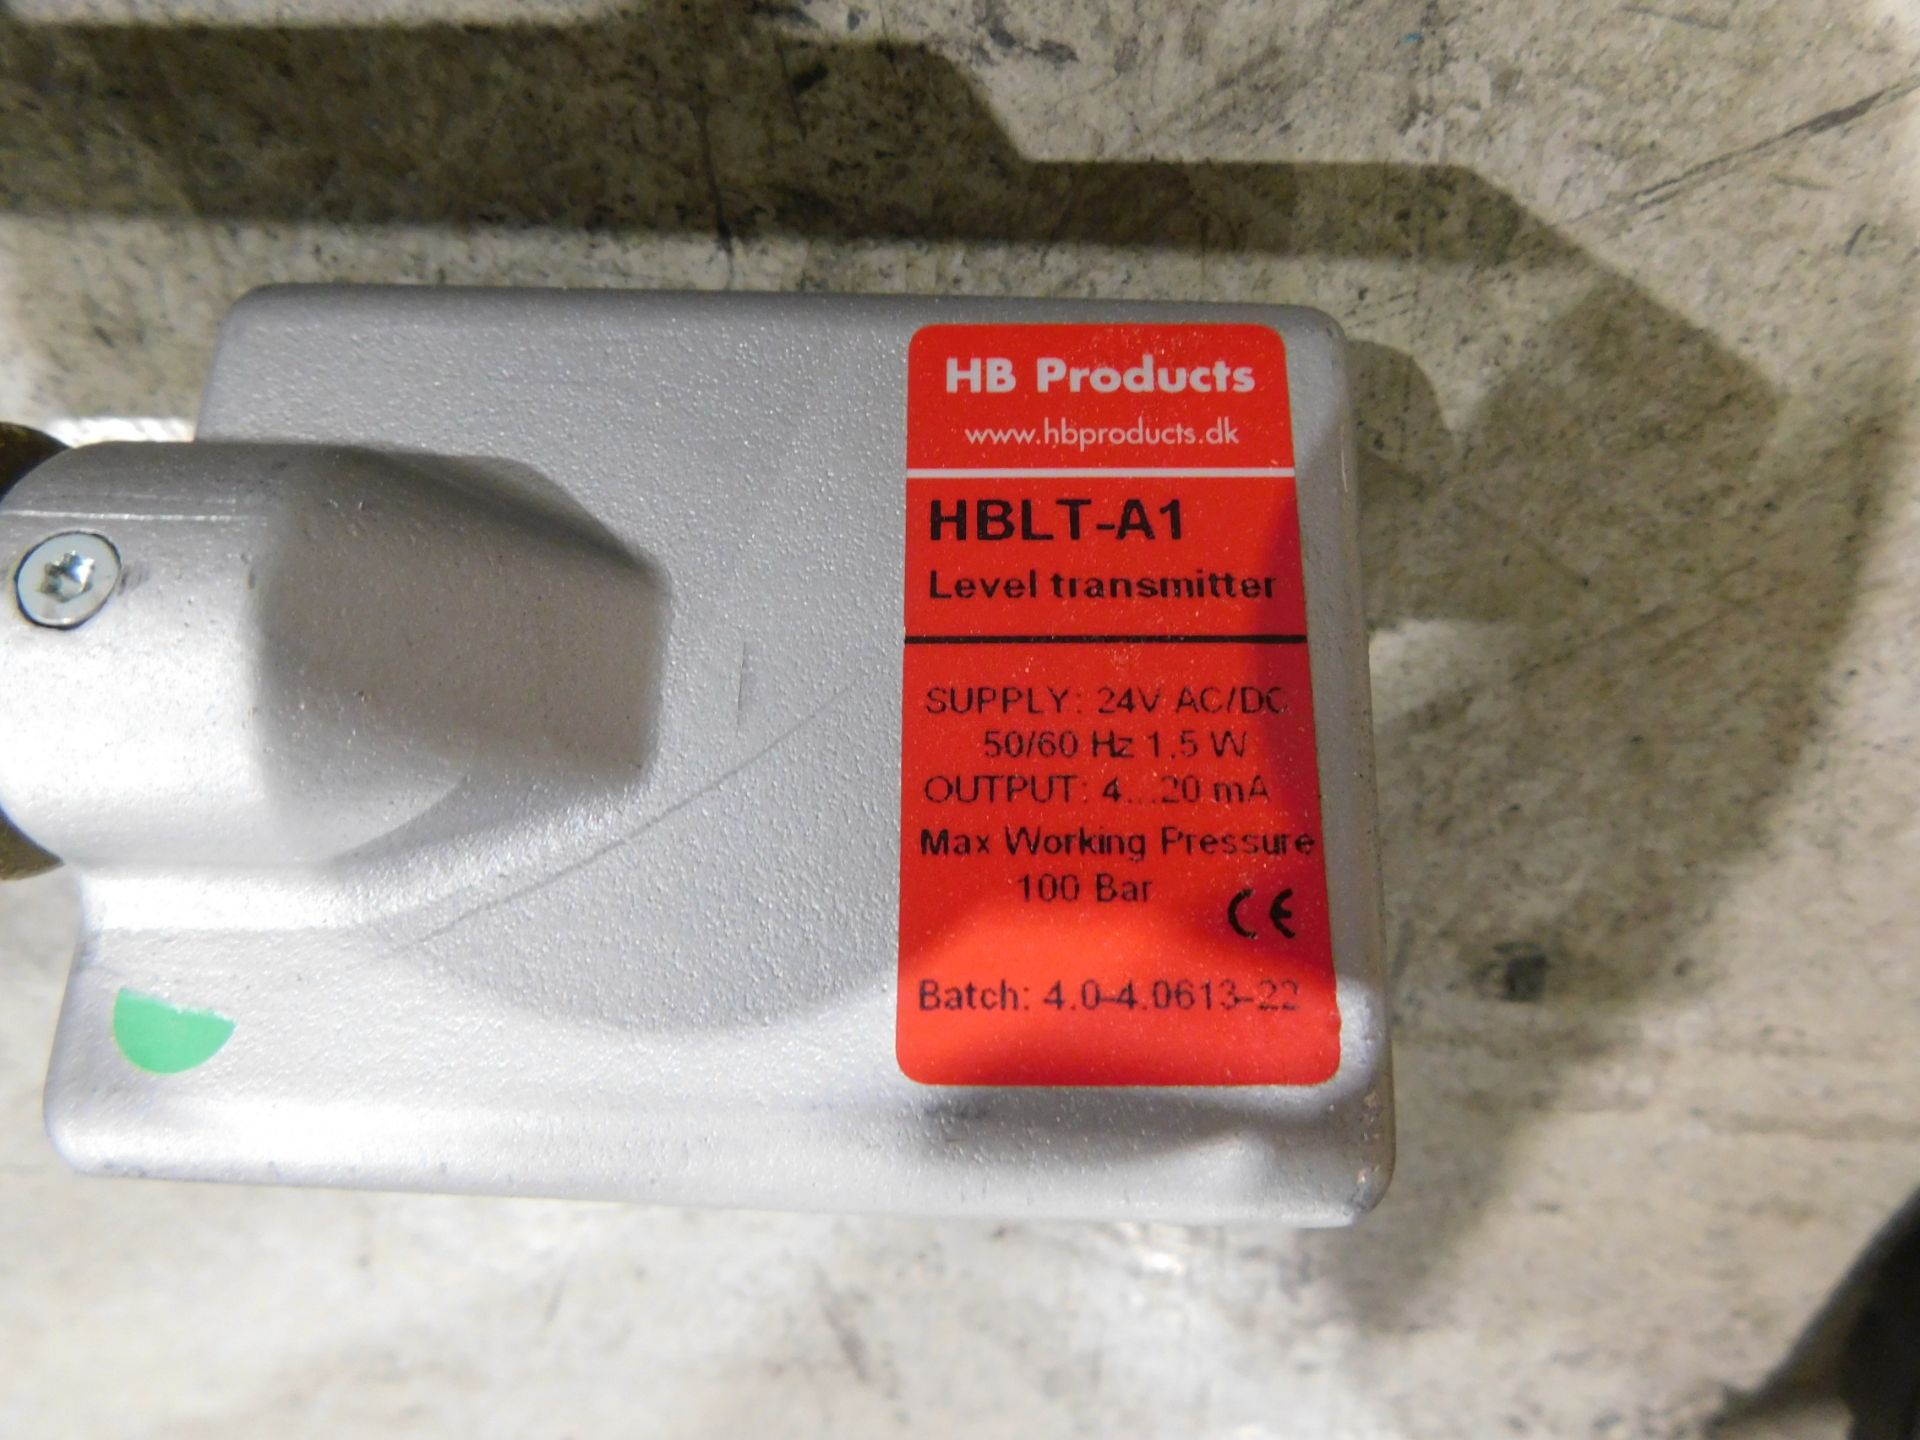 HB Products Liquid Level Transmitter, P/N 110567, HBLT-A1 - Image 3 of 3